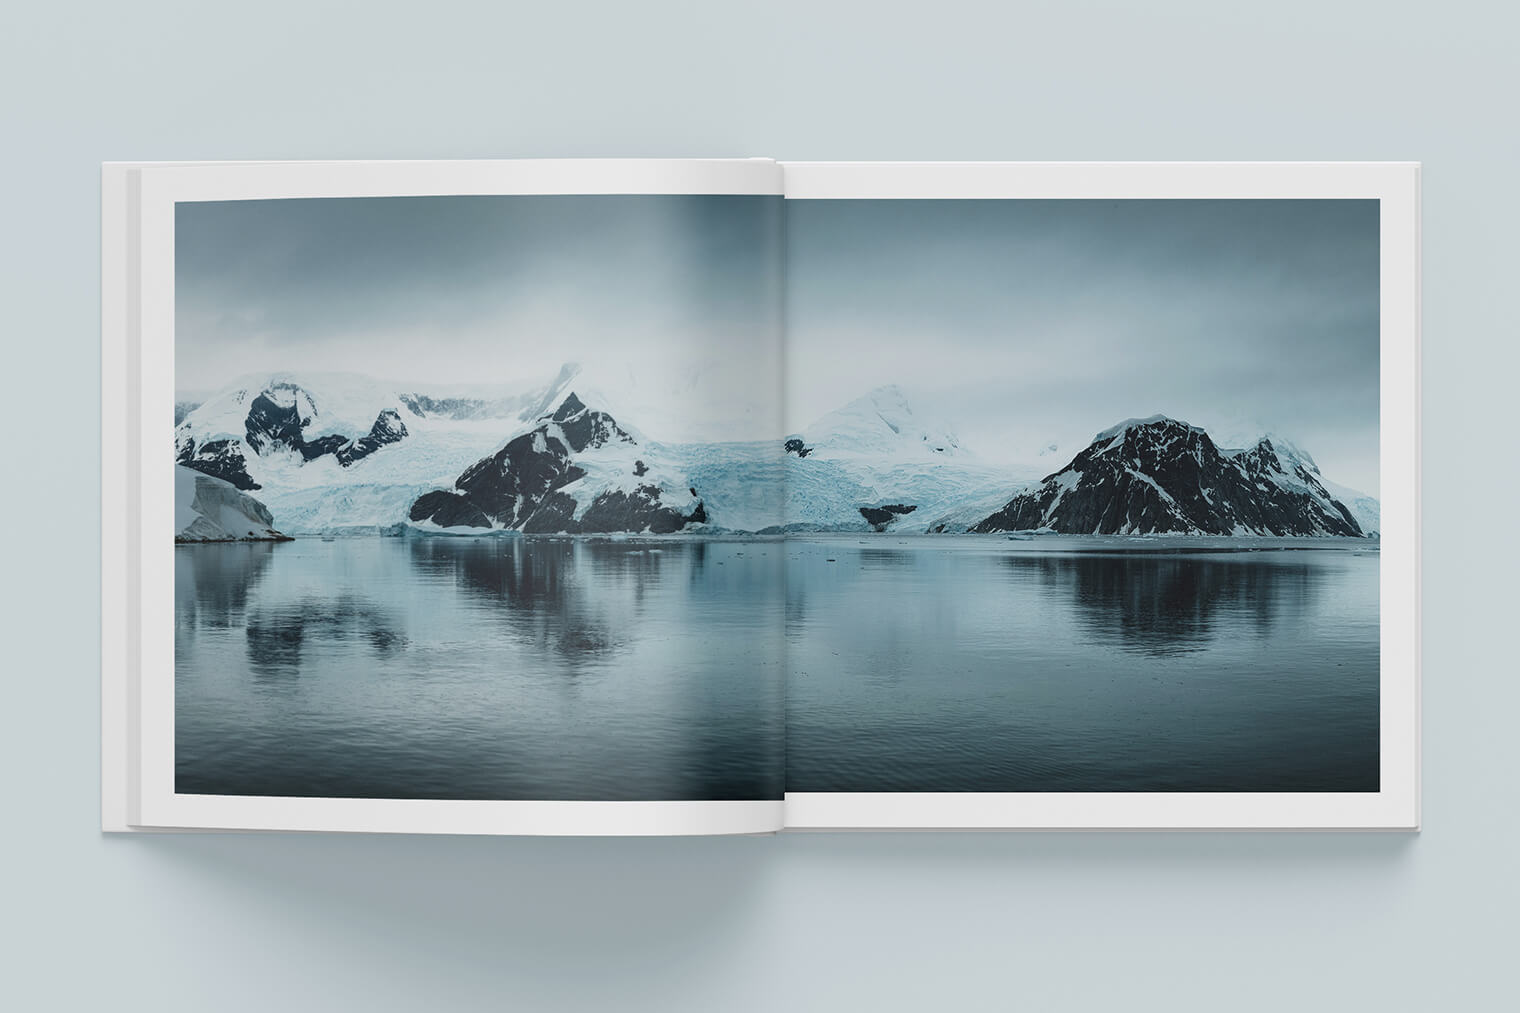 Book: Antarctica - Sailing Expedition with the Bark Europa by Jan Erik Waider